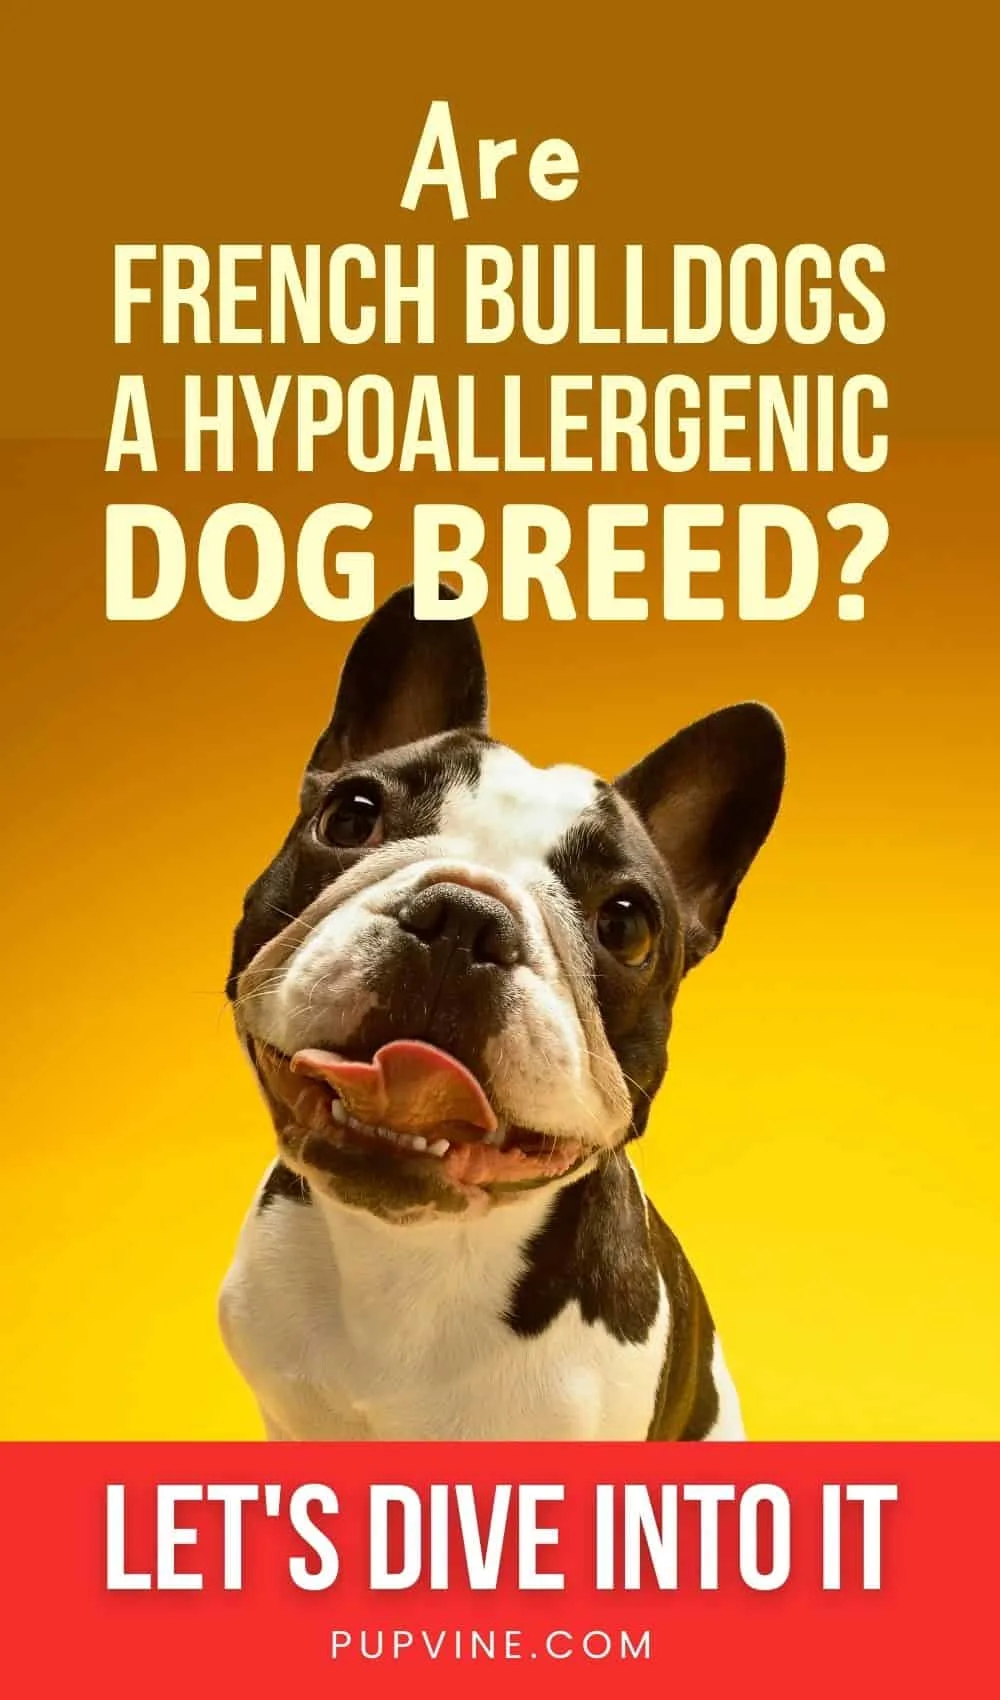 Are French Bulldogs a Hypoallergenic Dog Breed Let's Dive Into It!